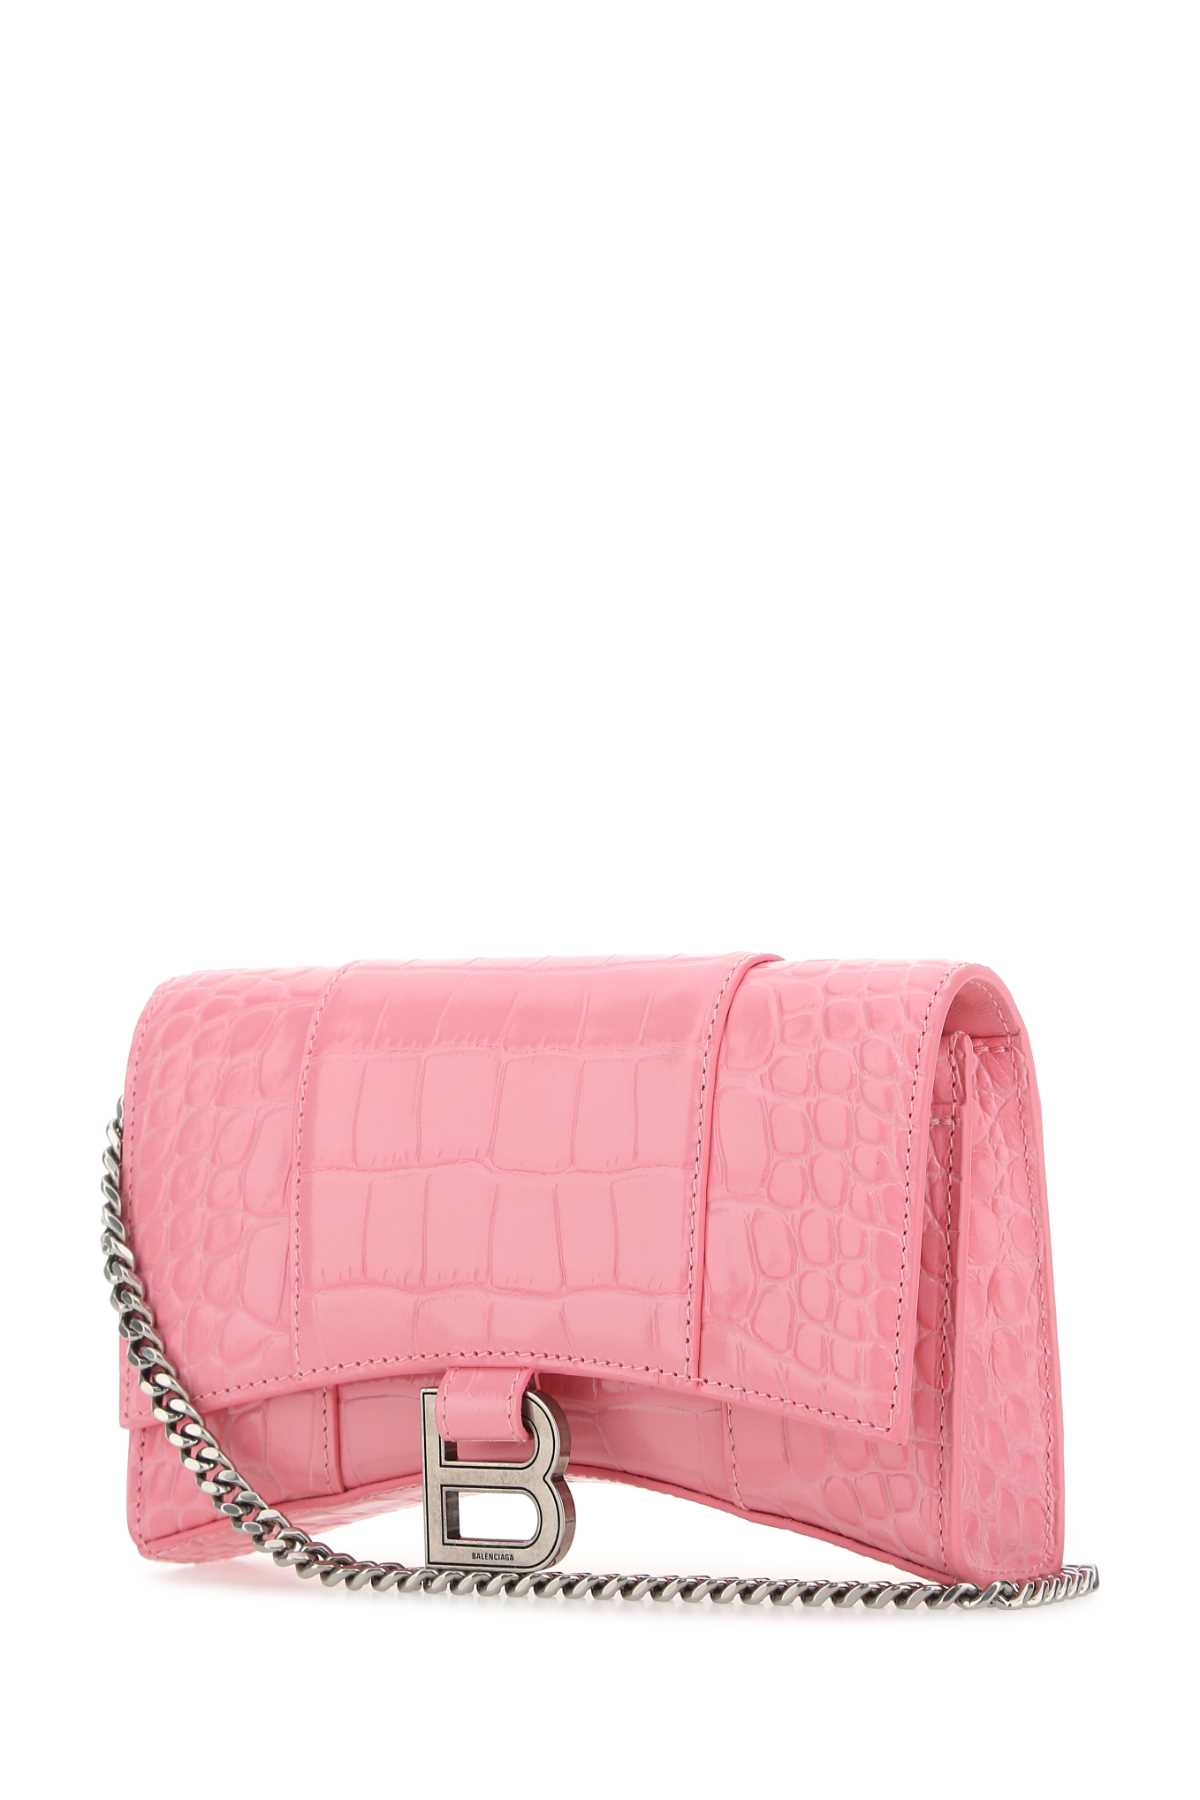 BALENCIAGA PINK LEATHER HOURGLASS WALLET